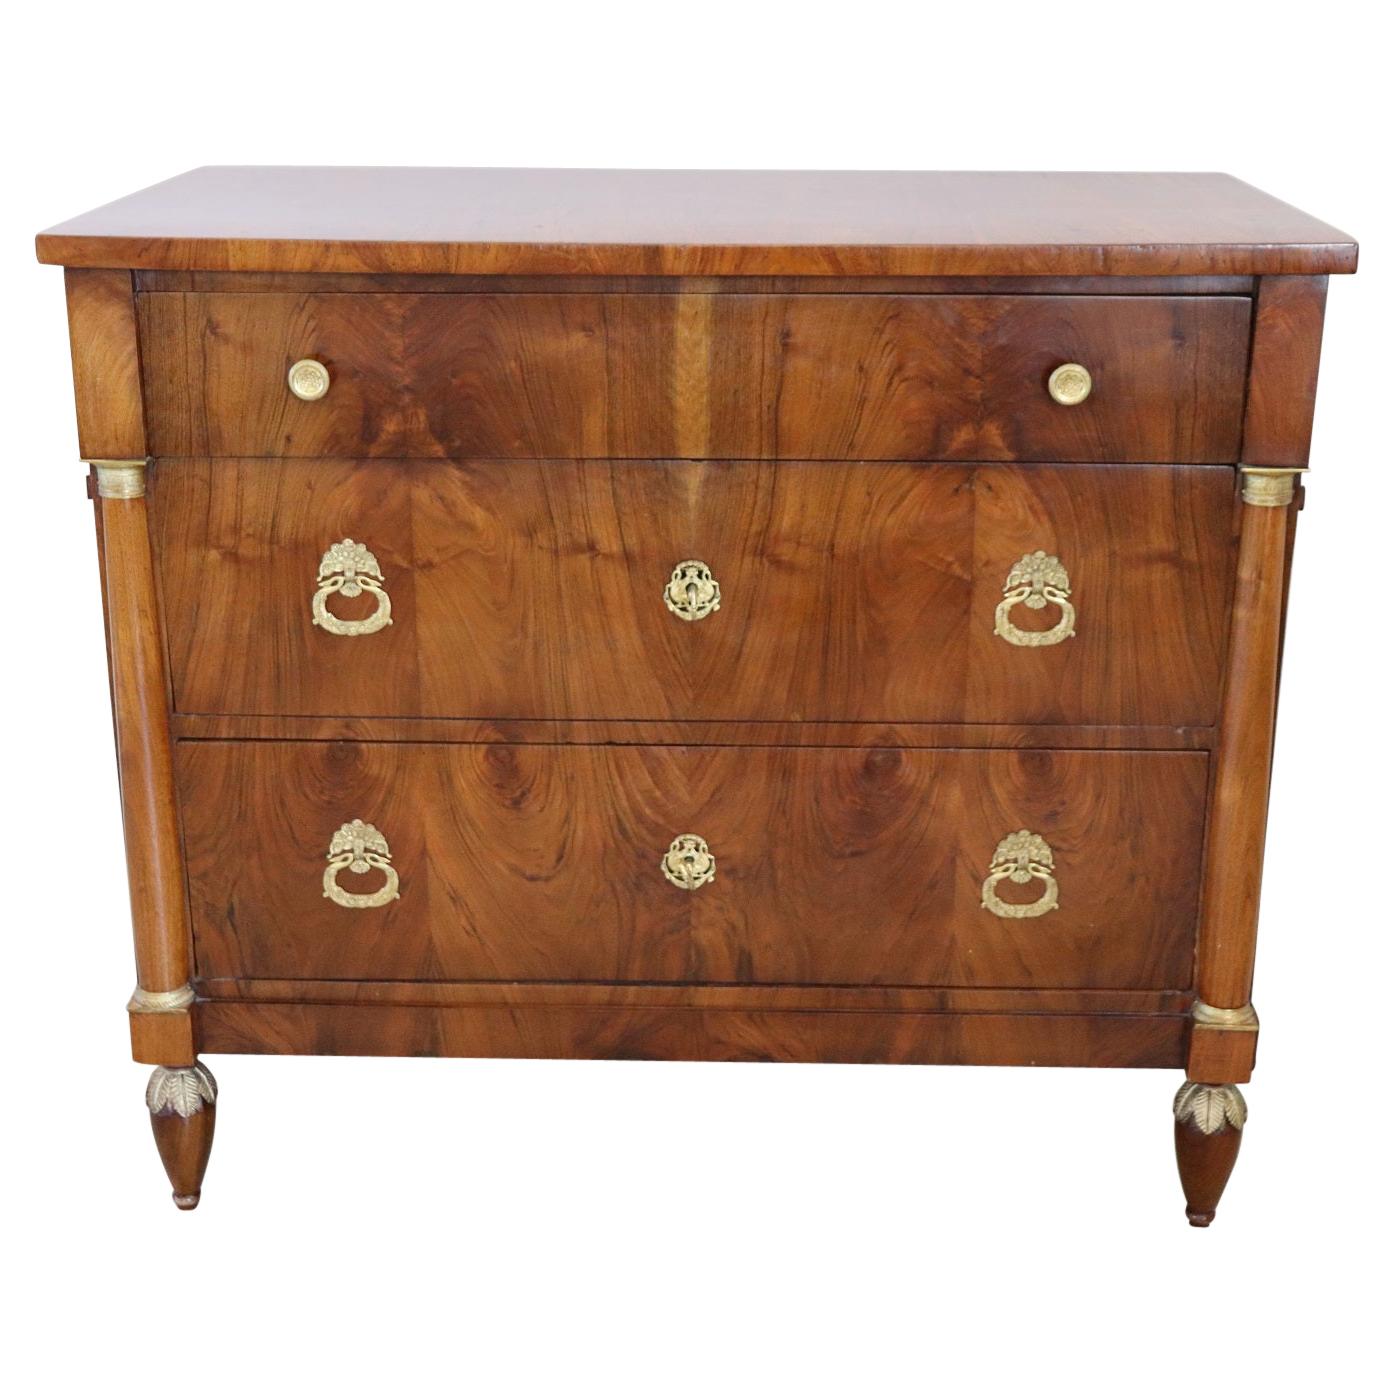 19th Century Empire Walnut Wood Commode or Chest of Drawers